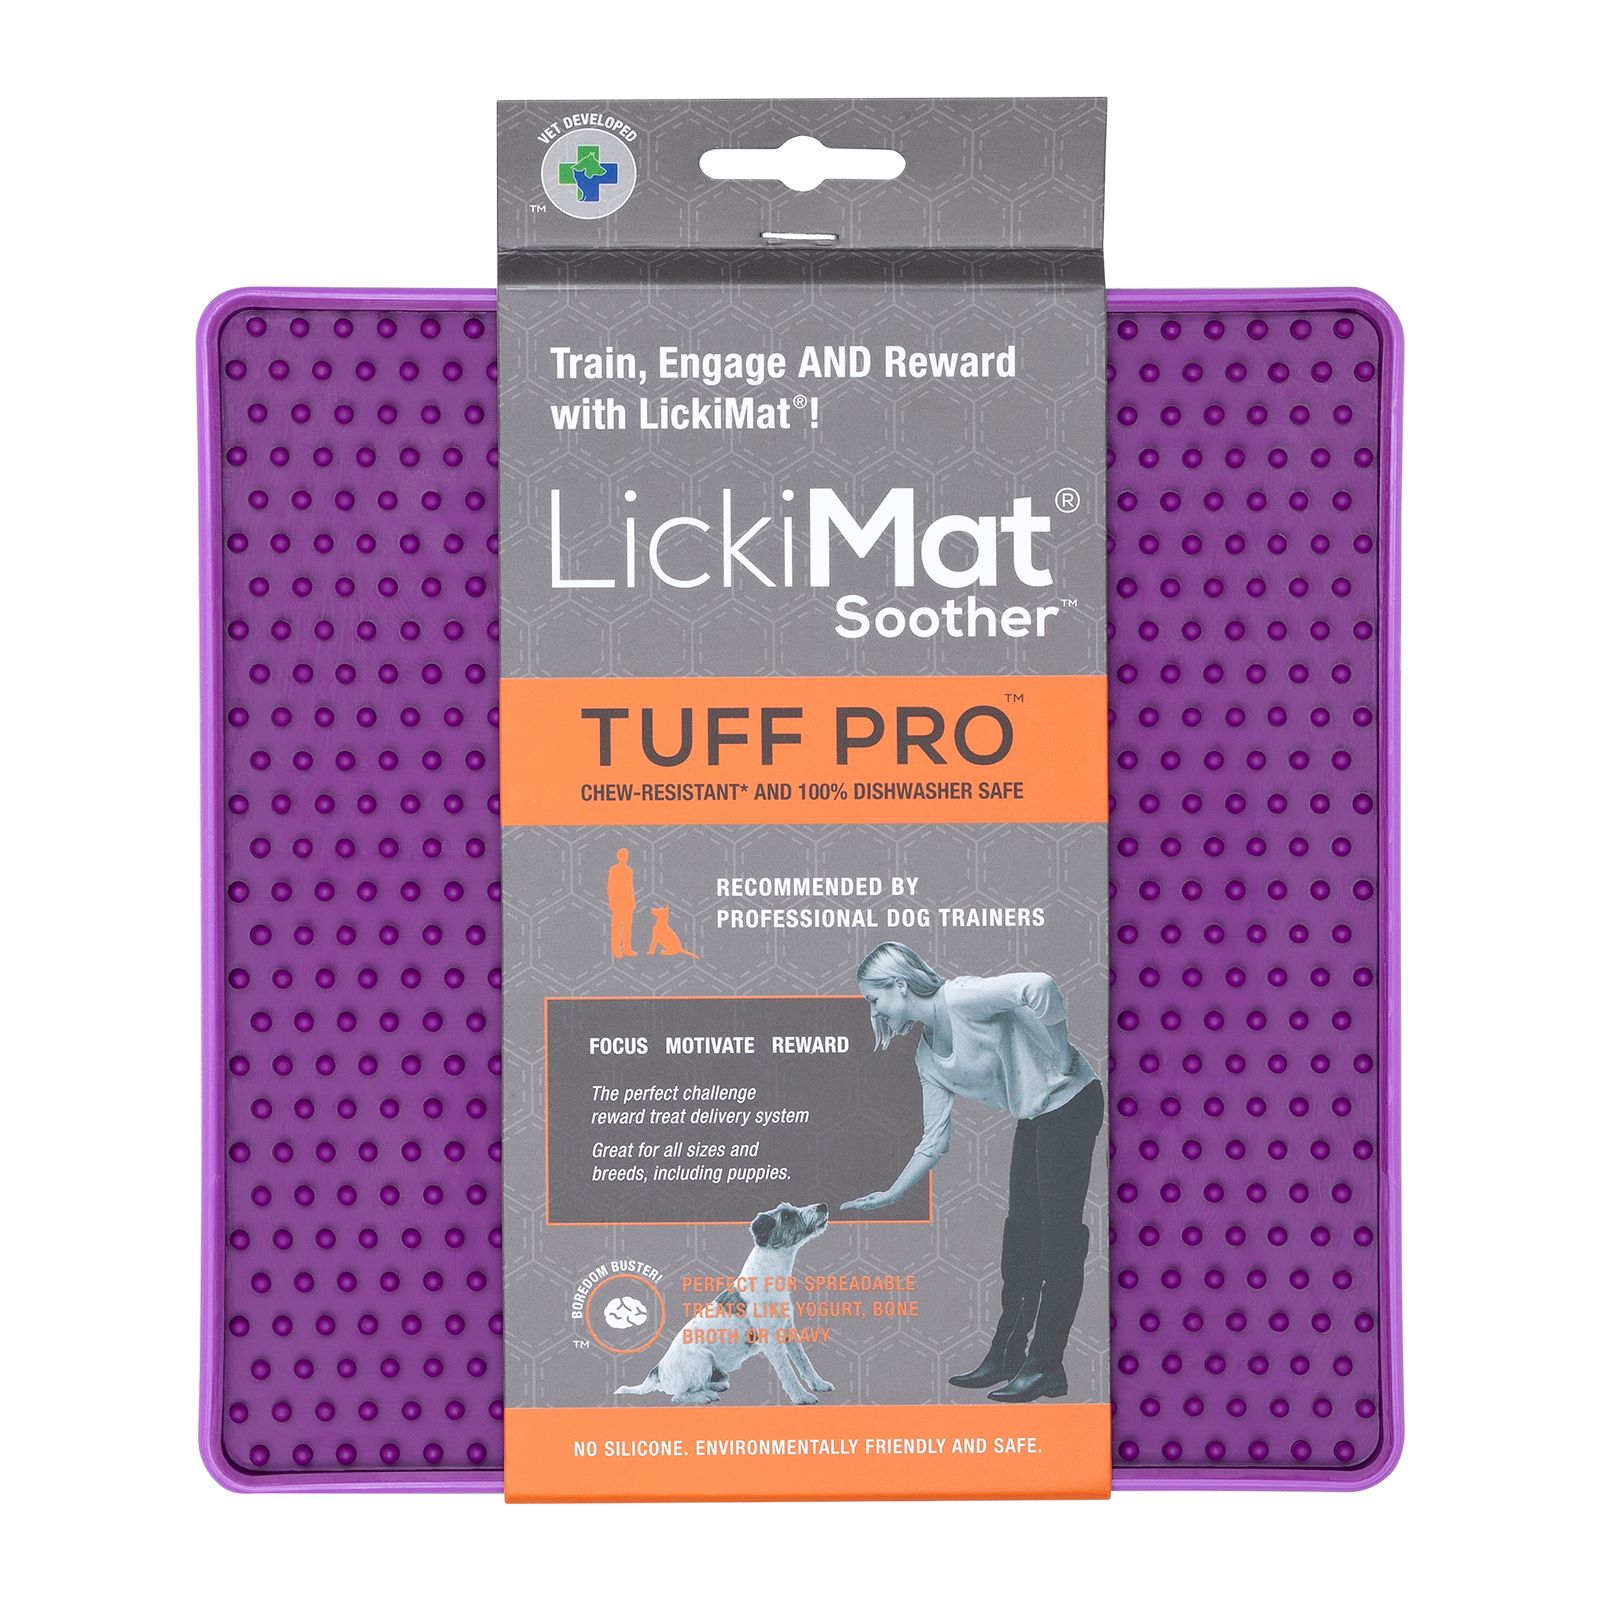 LickiMat Soother PRO Tuff Slow Food Licking Mat for Dogs image 4